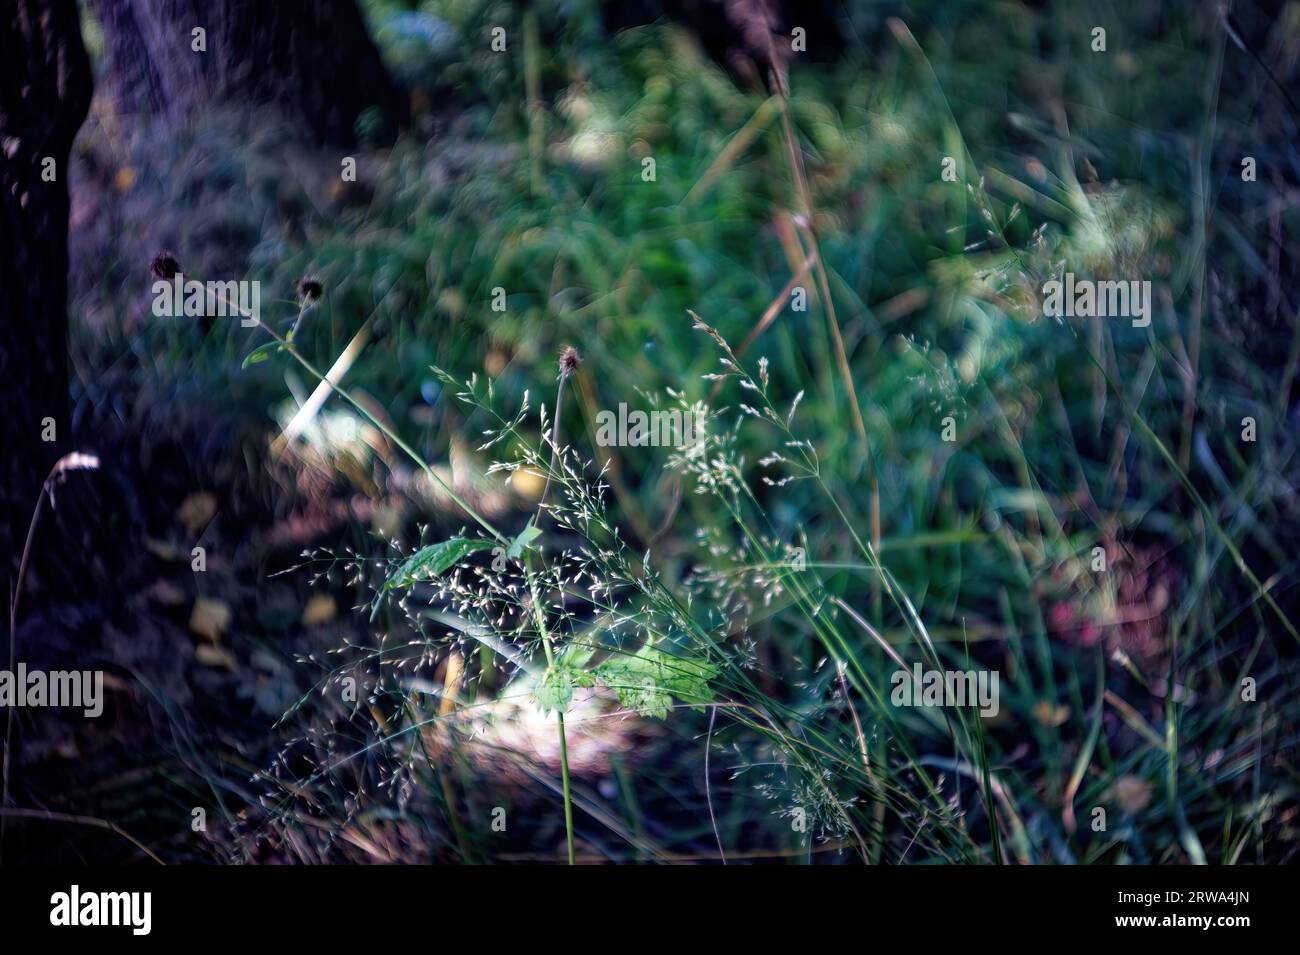 Wild grass in the forest, close up Stock Photo